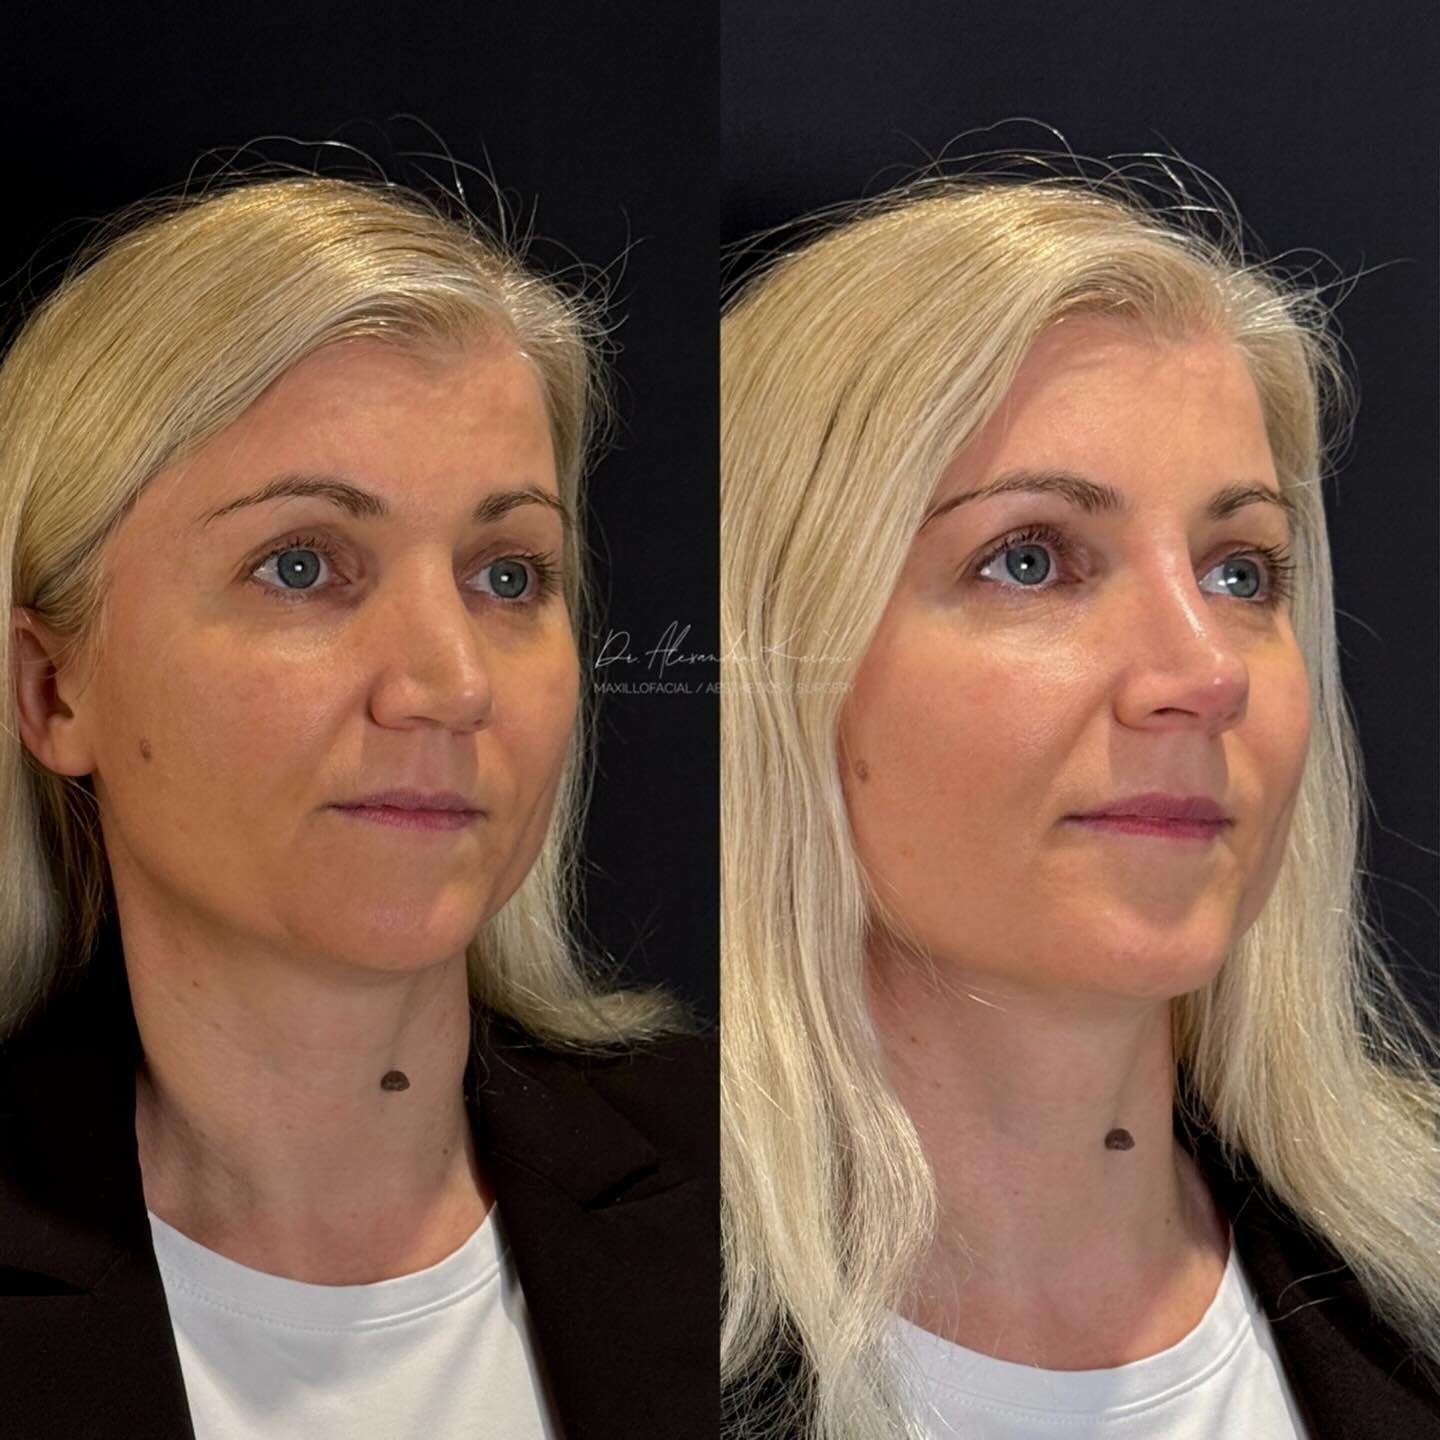 DR.K&rsquo;s Nose reshaping with dermal fillers is created for patients who need minor nasal remodeling but are not looking for a surgical rhinoplasty
.
Exclusively available at DR.K 👨🏼&zwj;⚕️
.
🎯 Treatment: Medical rhinocorrection based on long l